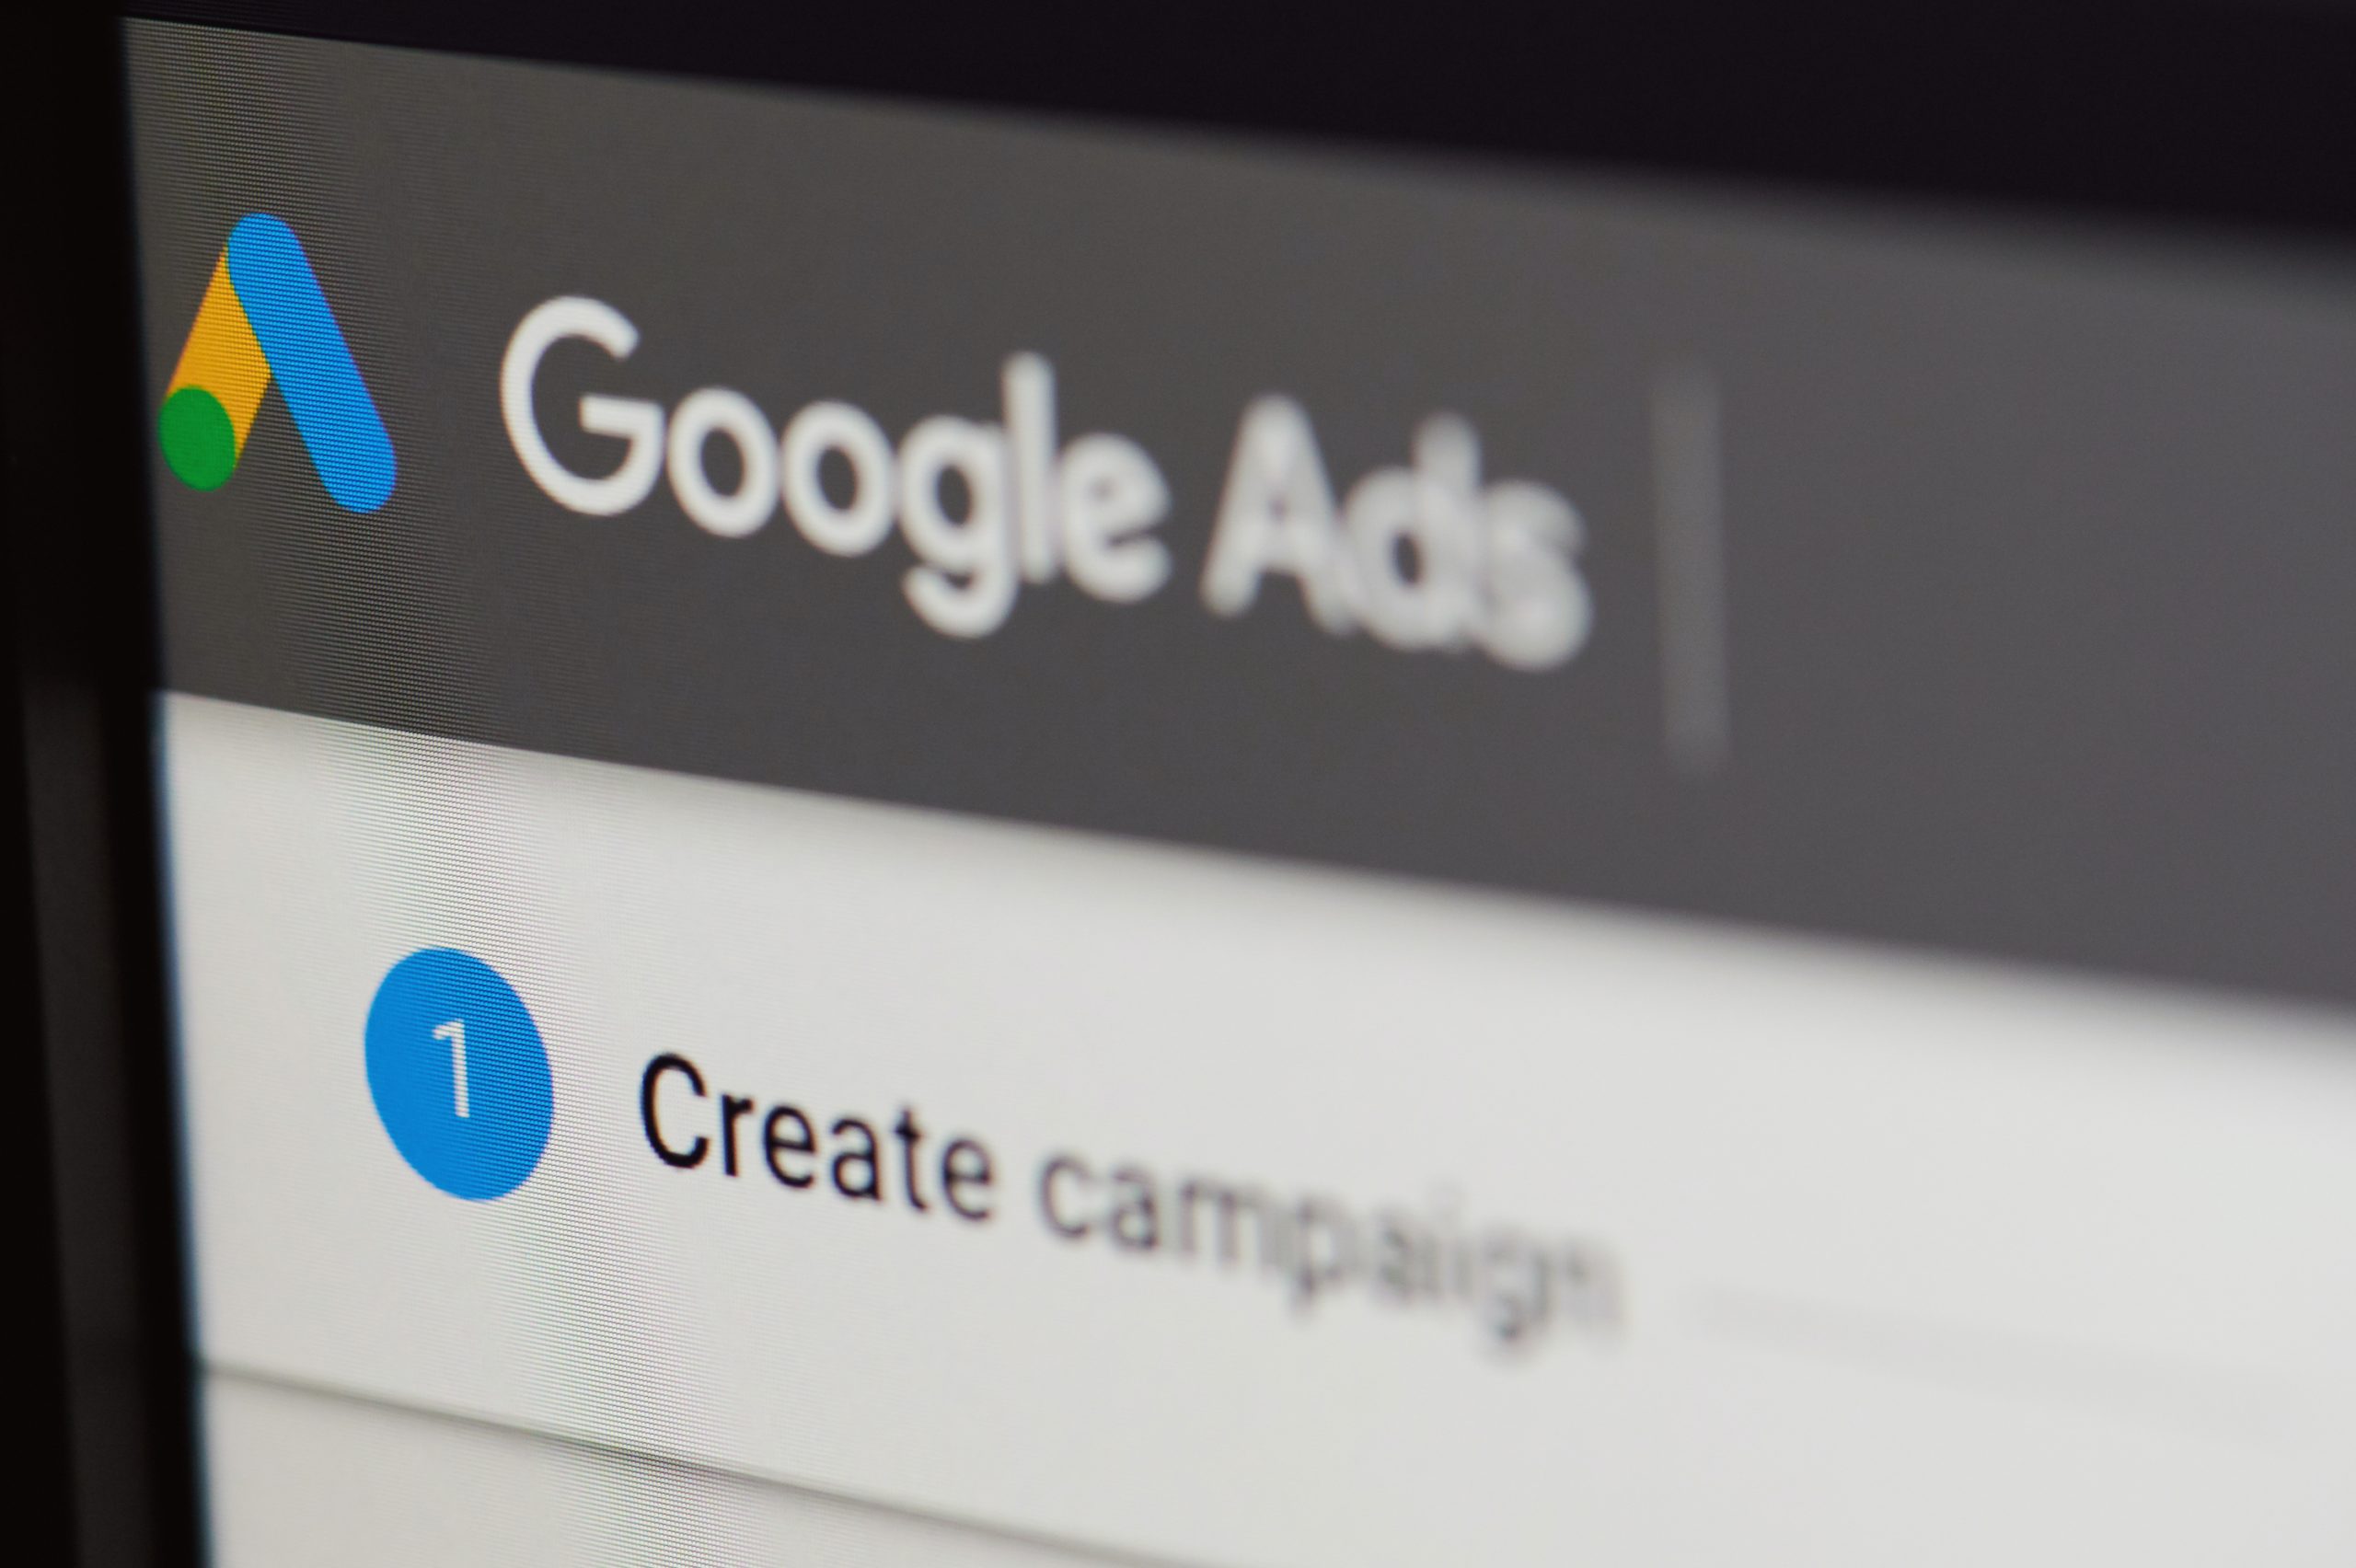 Google Announces "Things to Do" Free Listing & Ad Unit